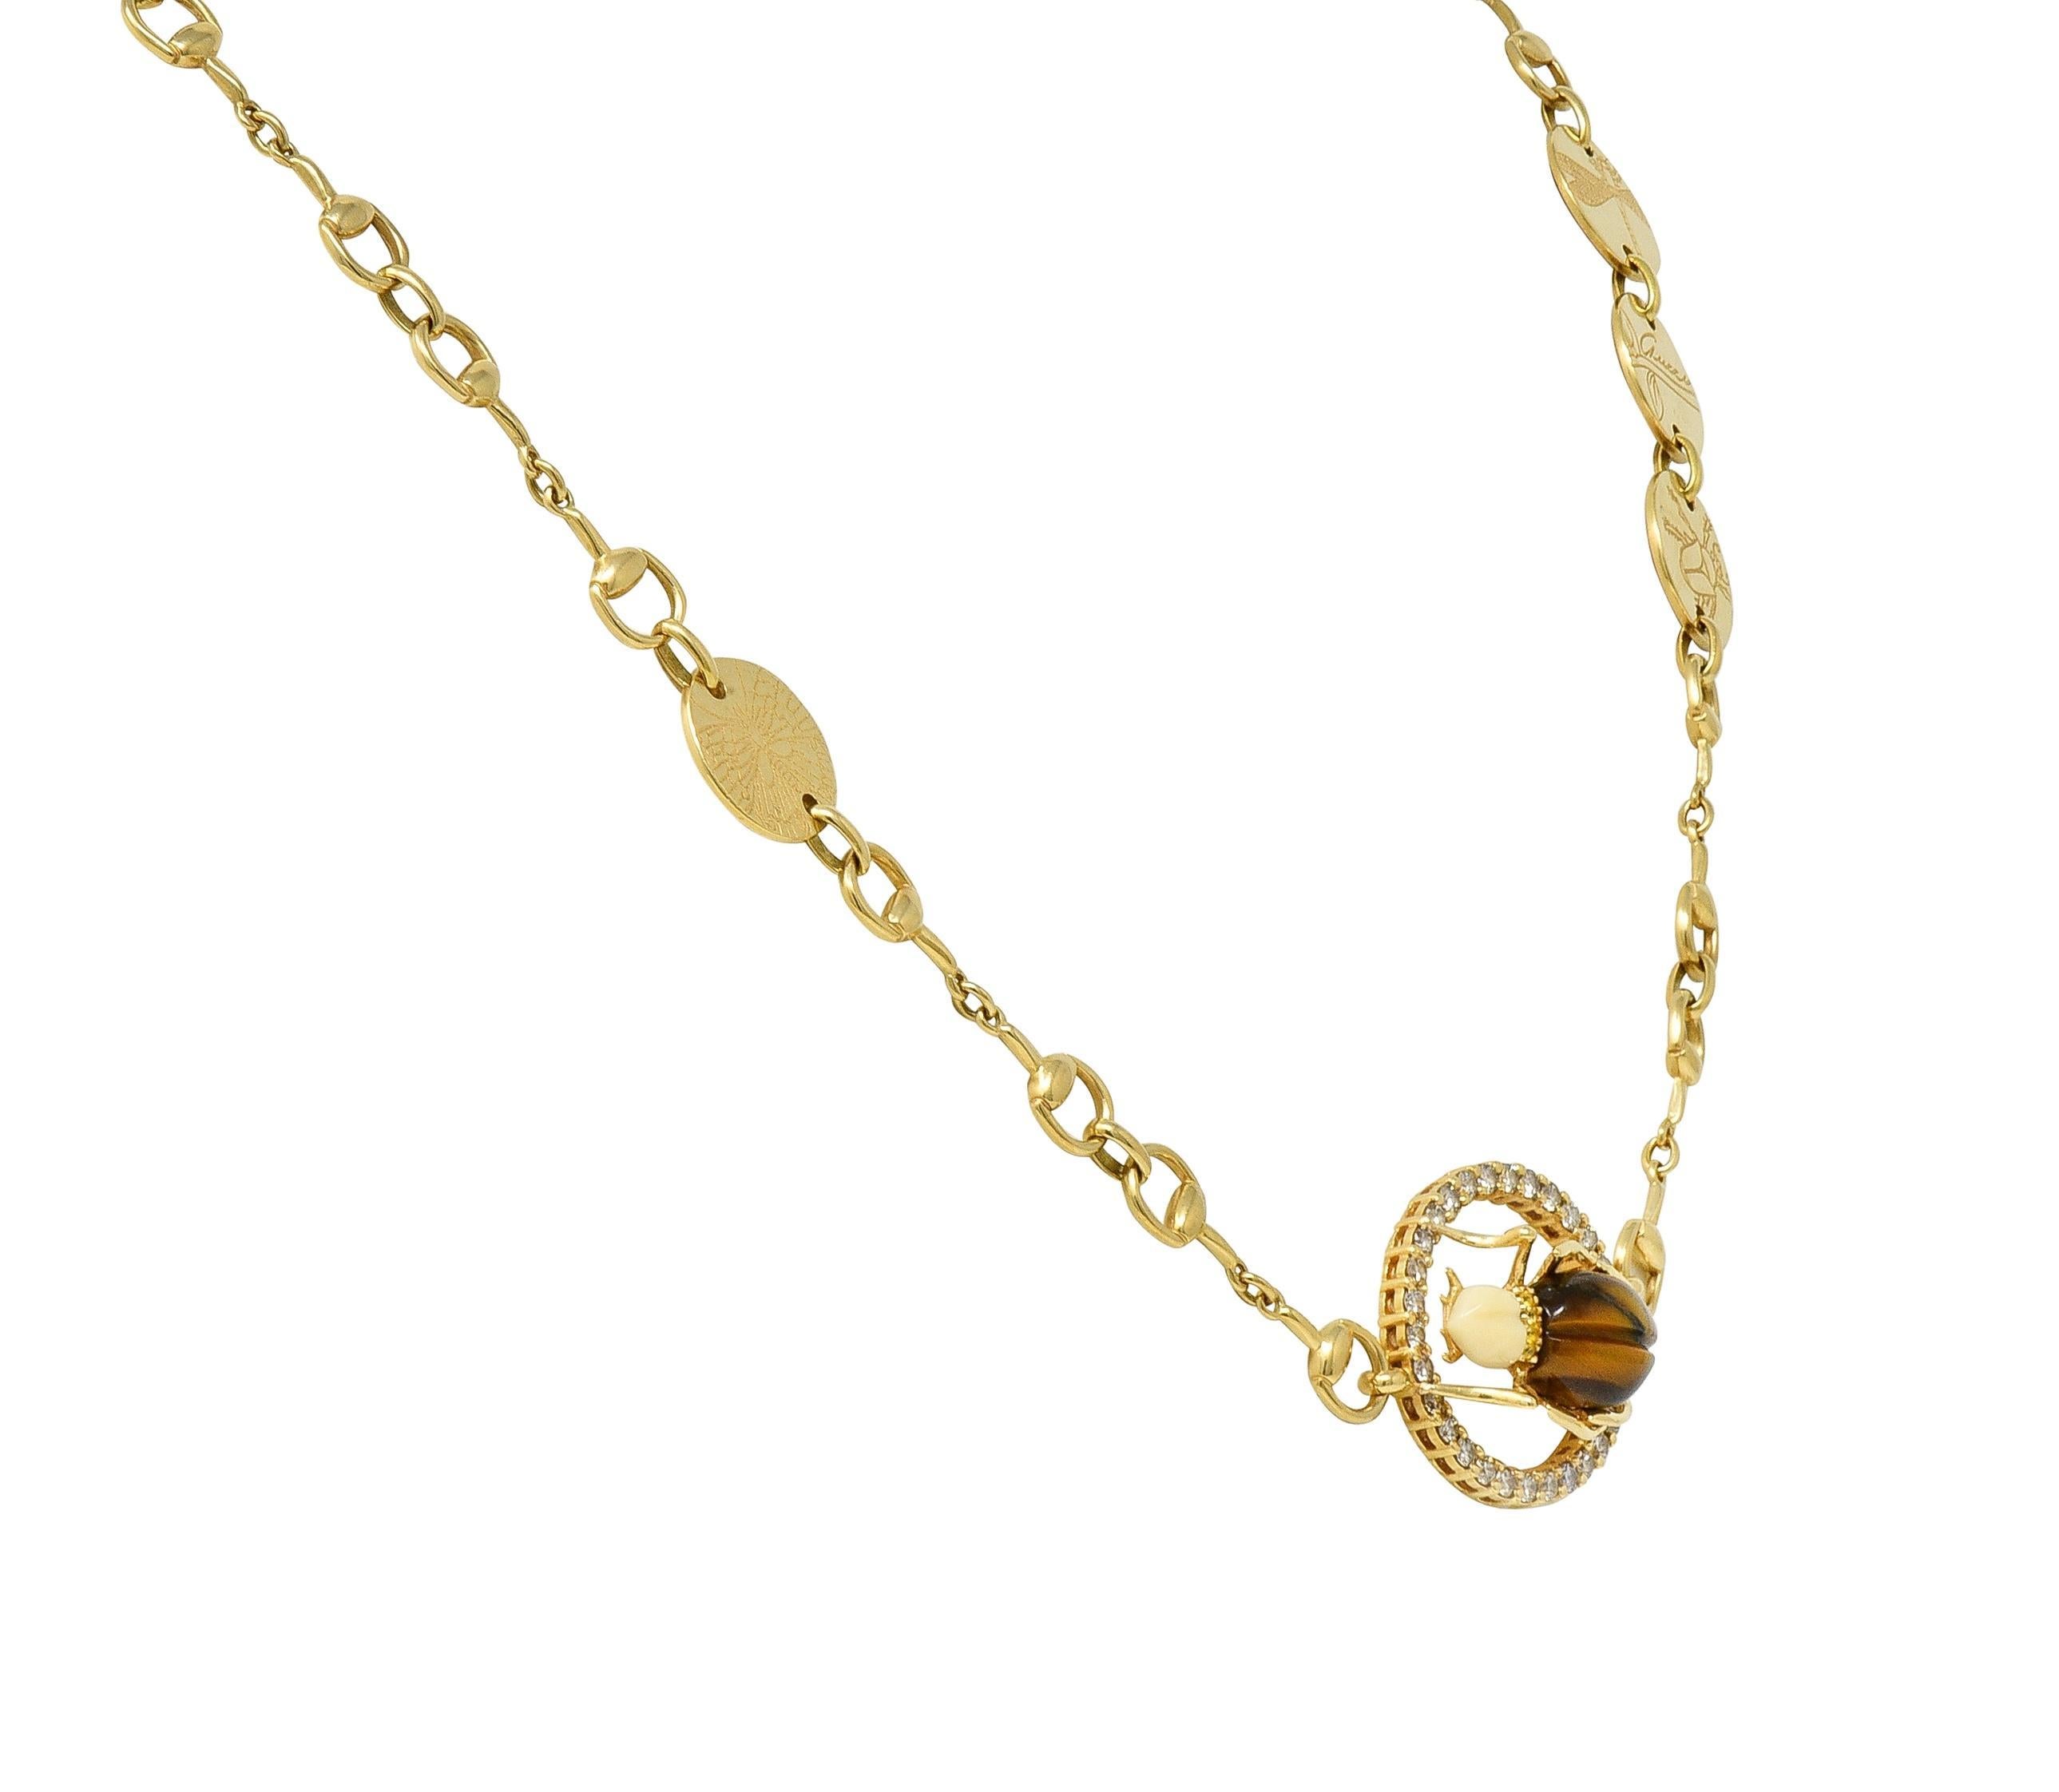 Gucci 2010 Diamond Tiger's Eye 18 Karat Yellow Gold Beetle Horsebit Necklace In Excellent Condition For Sale In Philadelphia, PA